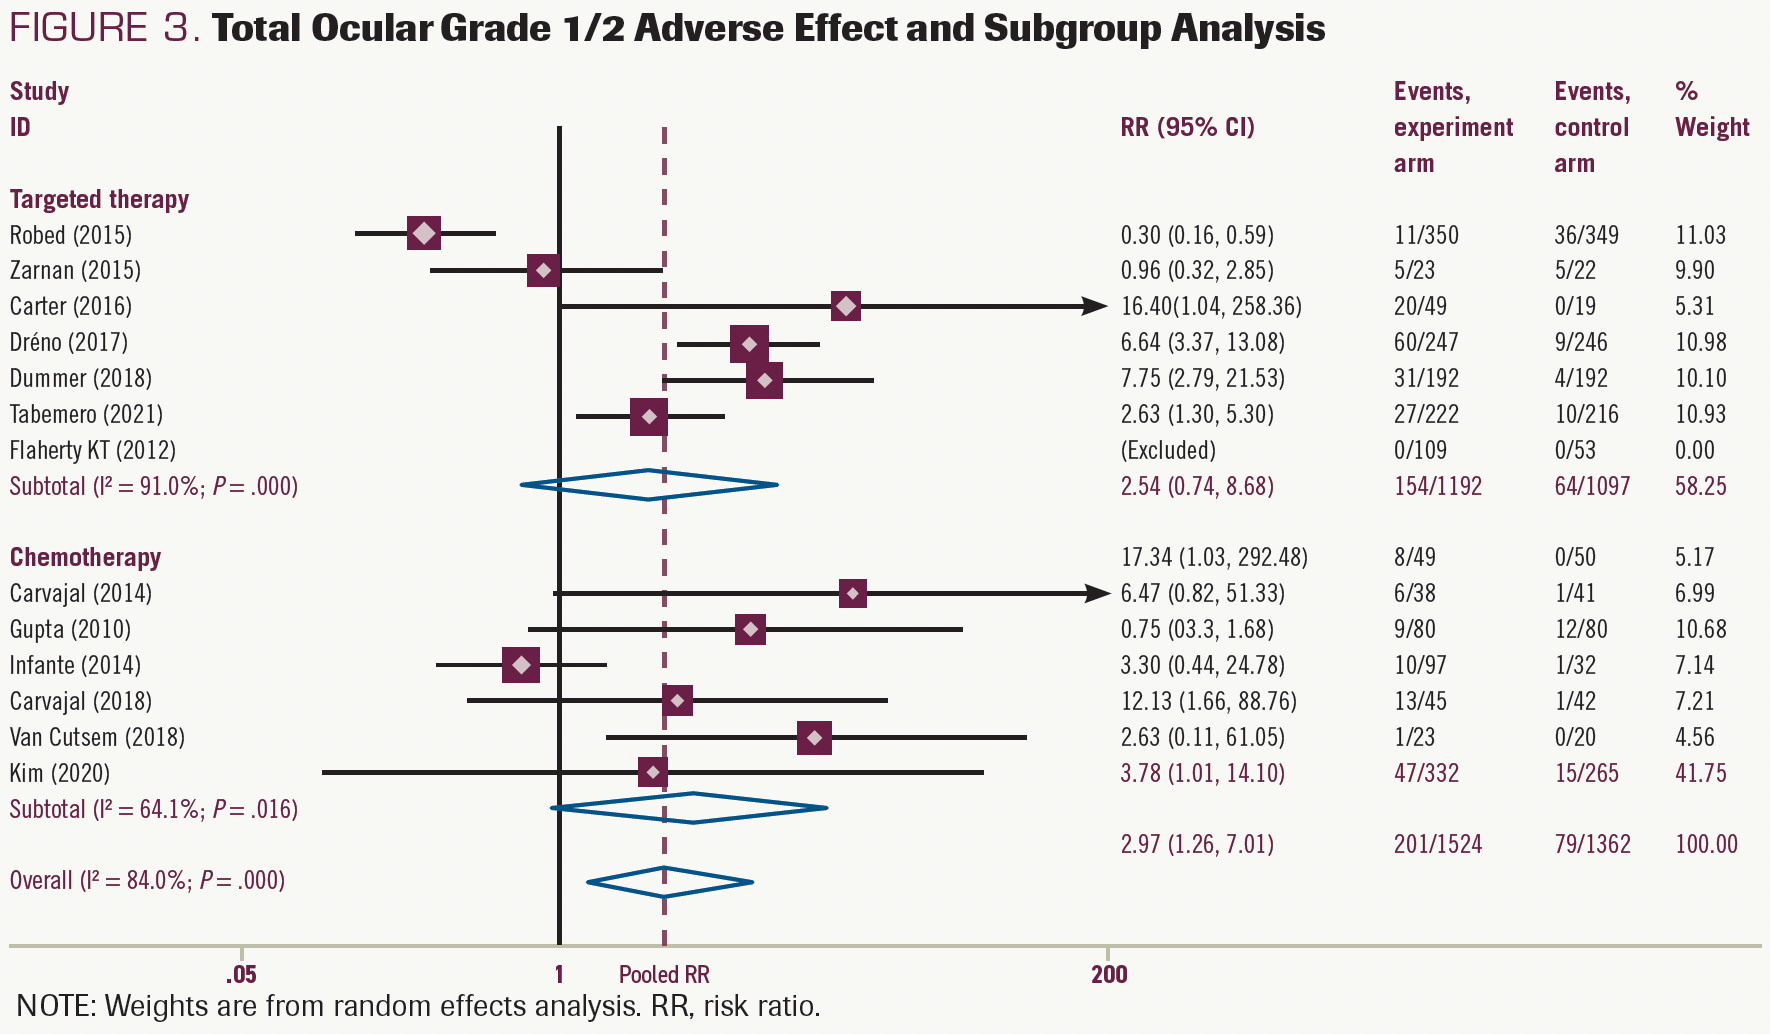 FIGURE 3. Total Ocular Grade 1/2 Adverse Effect and Subgroup Analysis